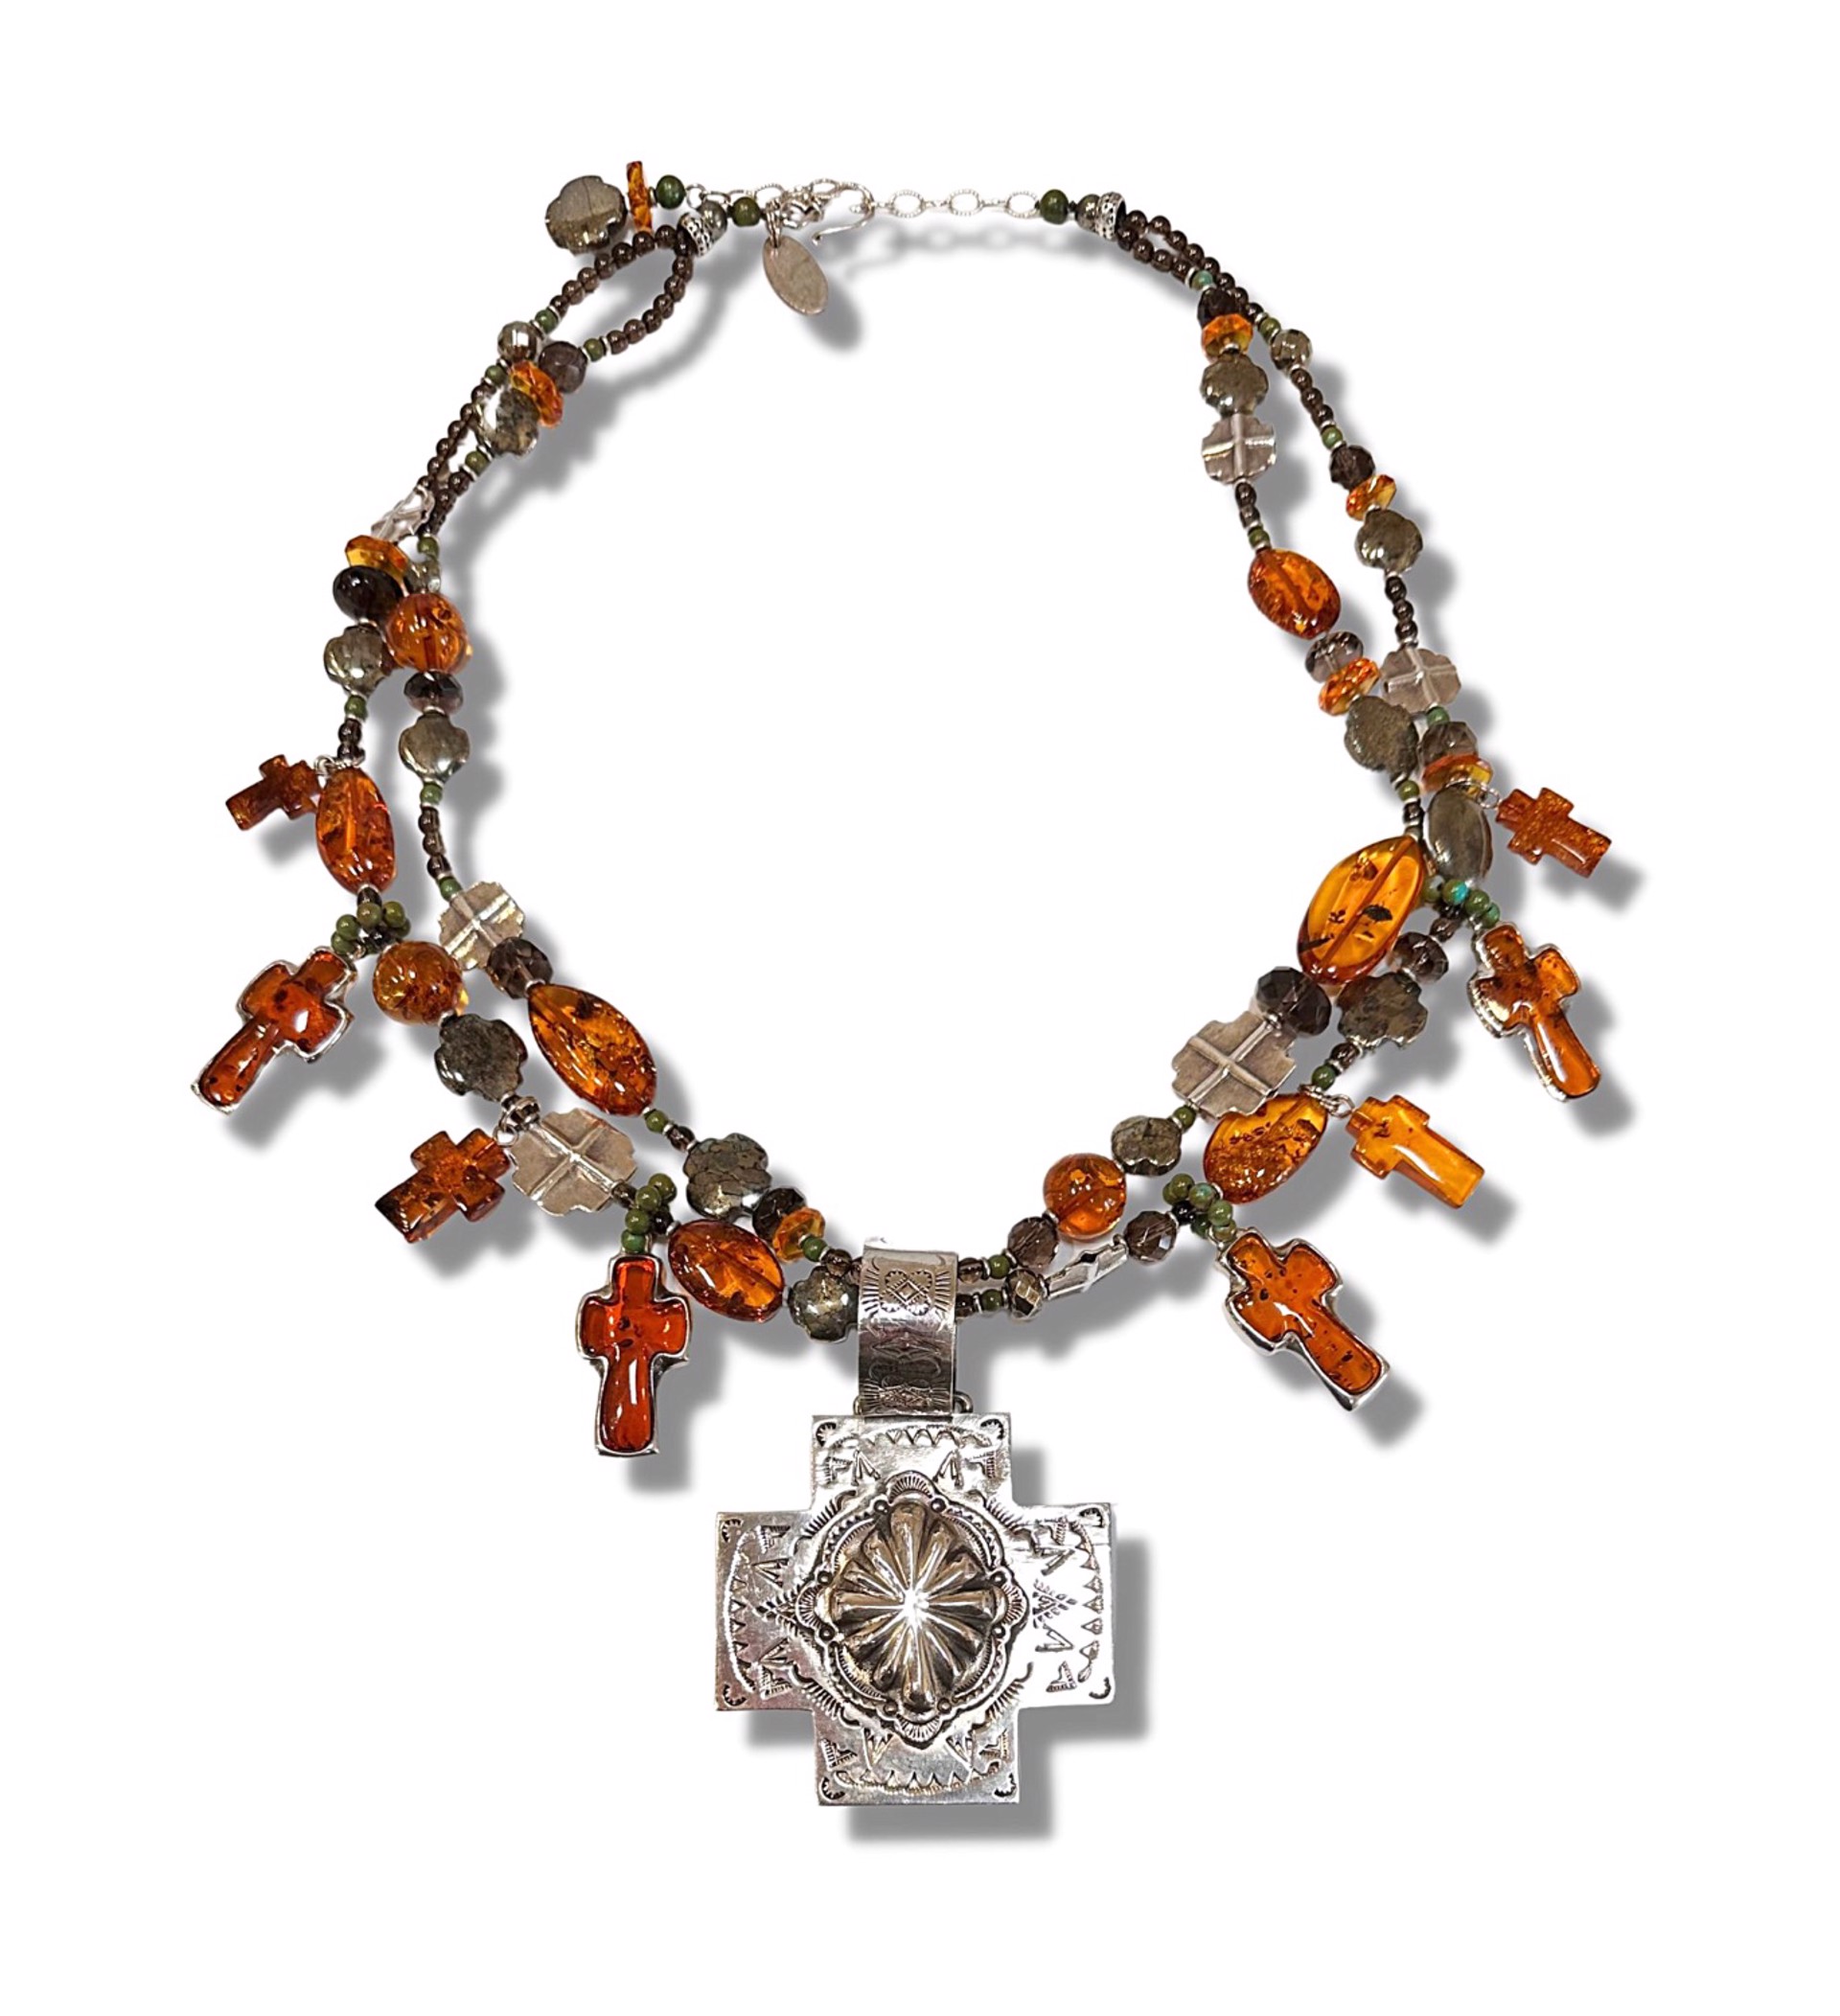 Necklace - 2 Strand Amber and Sterling Silver Crosses #51 by Kim Yubeta